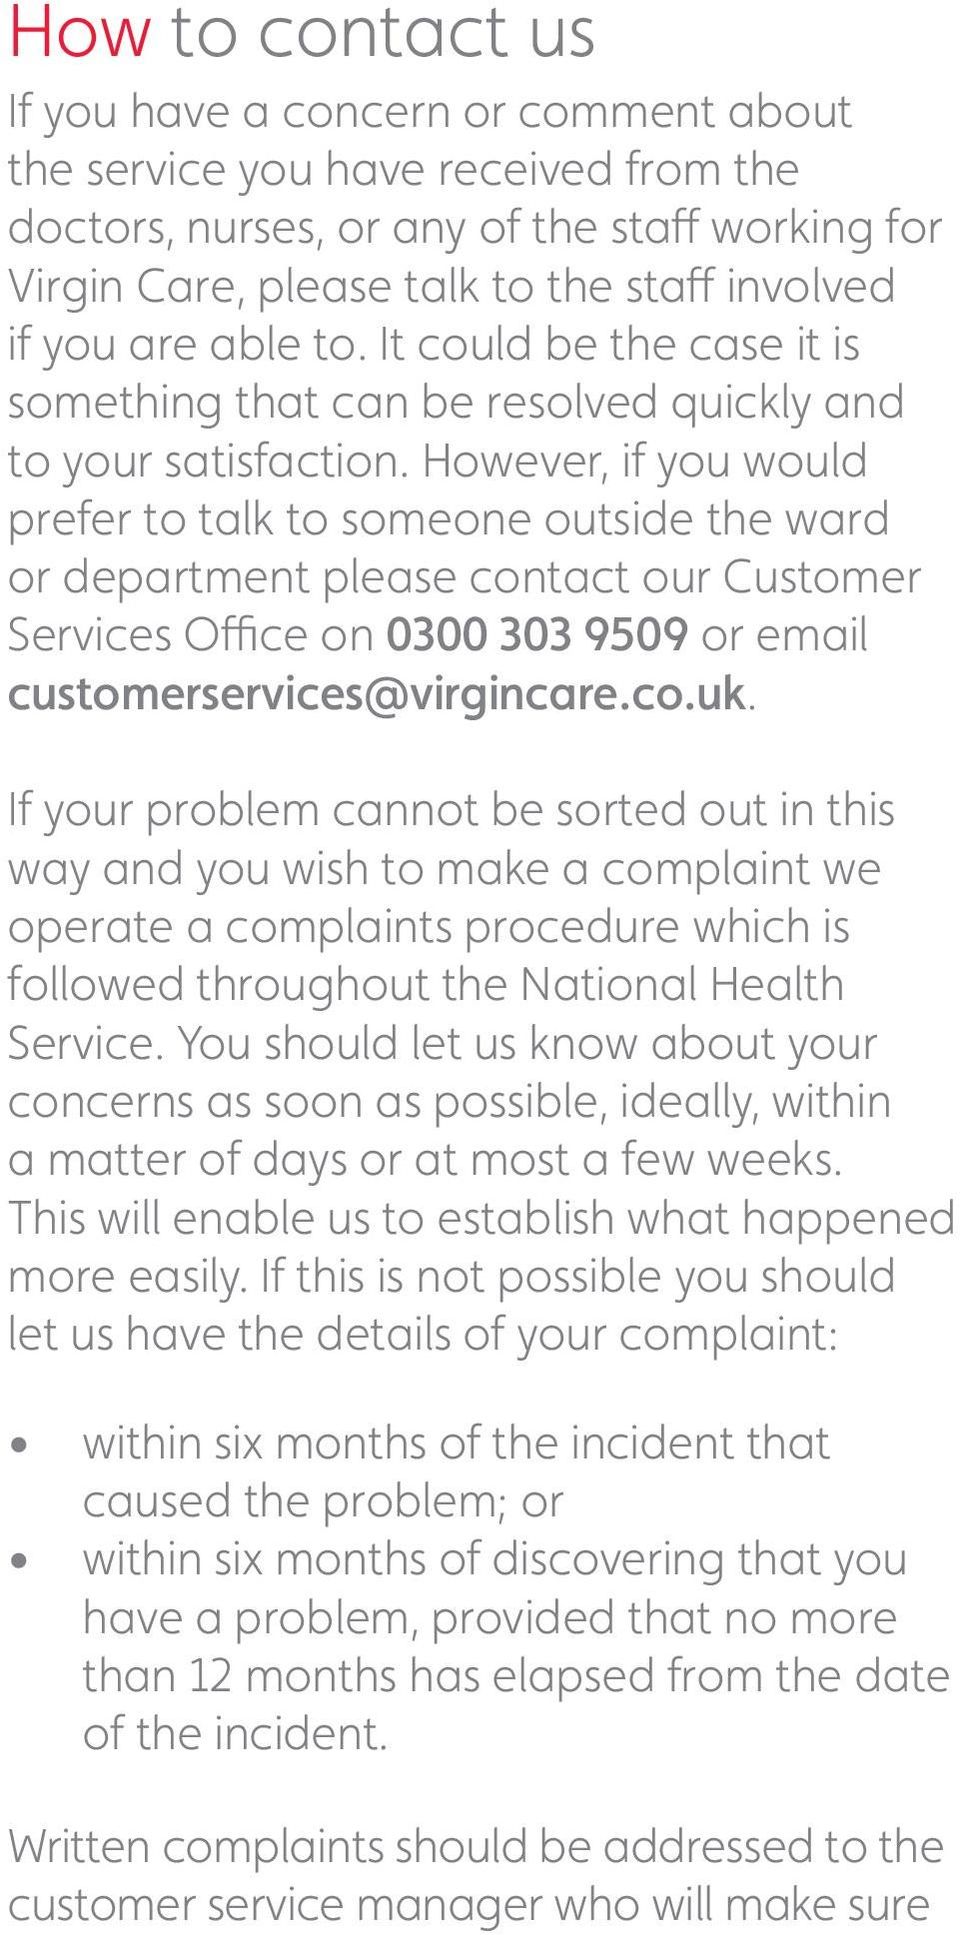 However, if you would prefer to talk to someone outside the ward or department please contact our Customer Services Office on 0300 303 9509 or email customerservices@virgincare.co.uk.